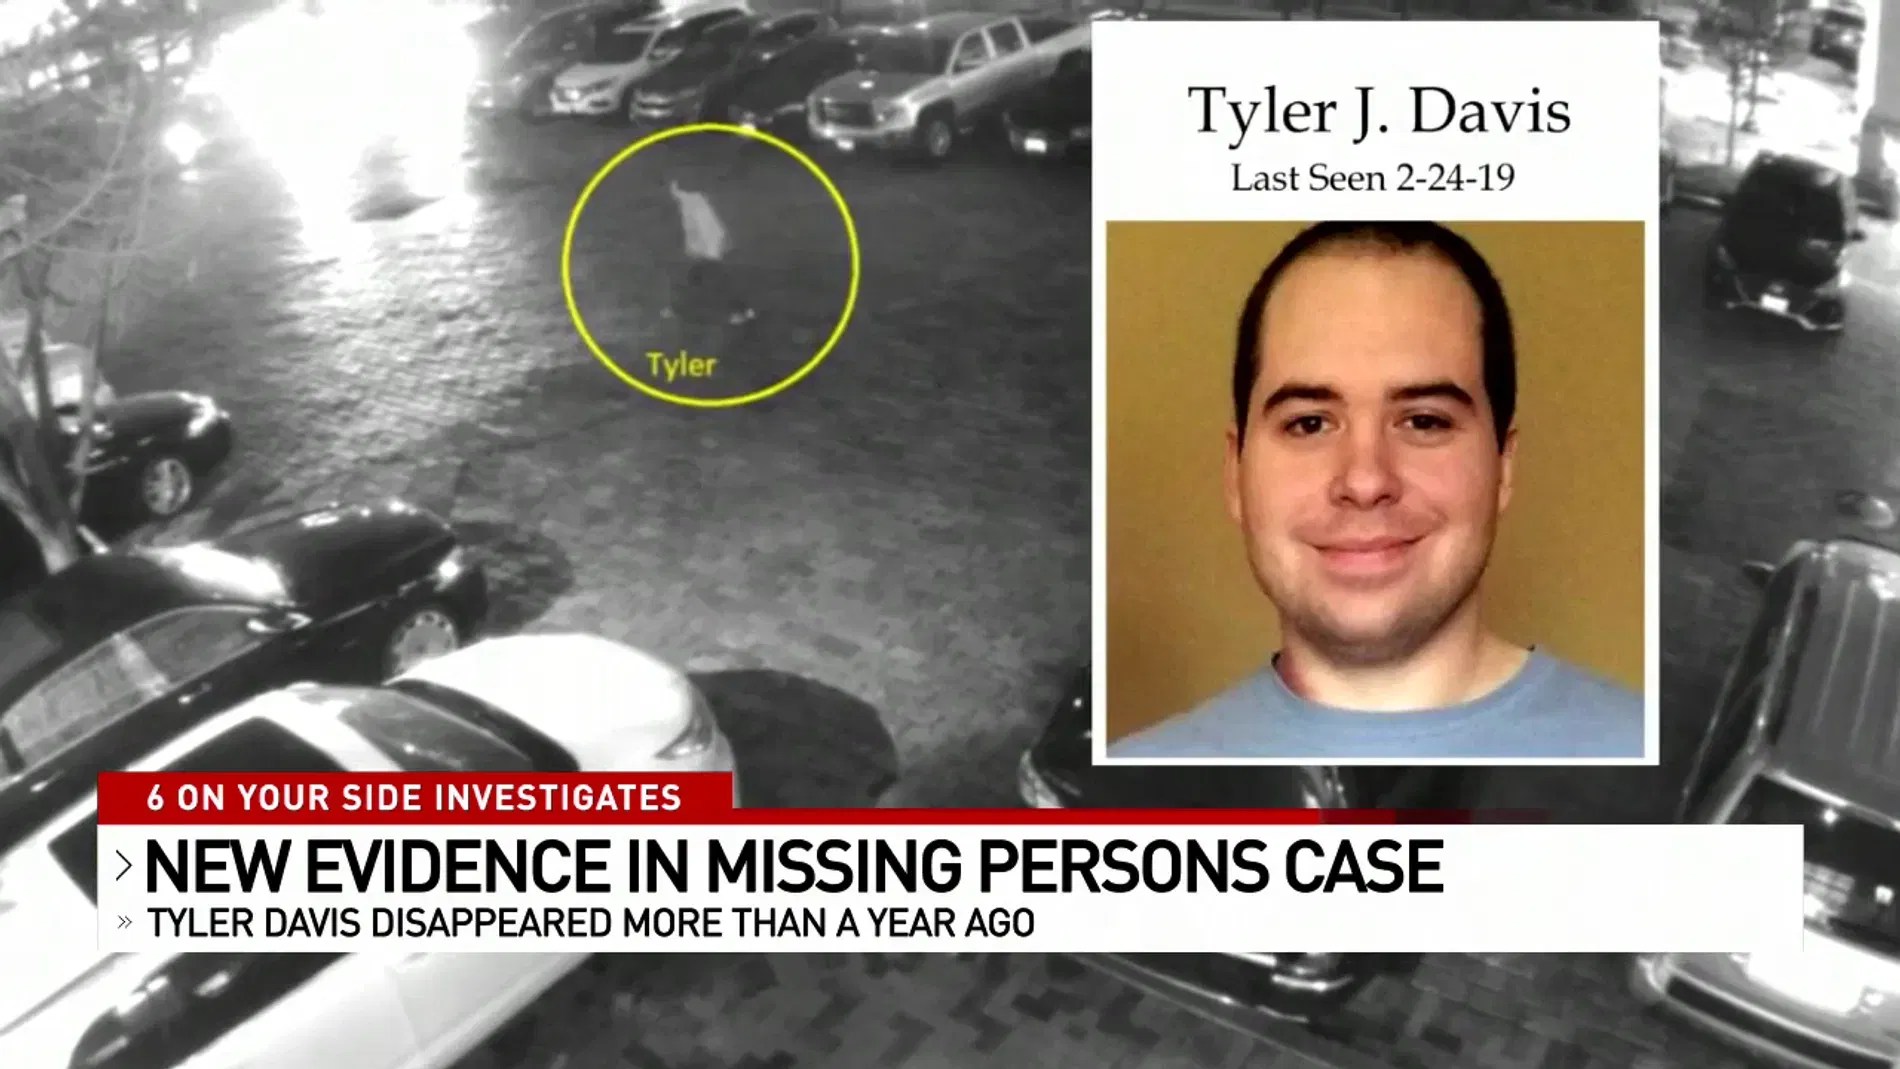 Columbus Police reviewing new evidence in Tyler Davis missing persons